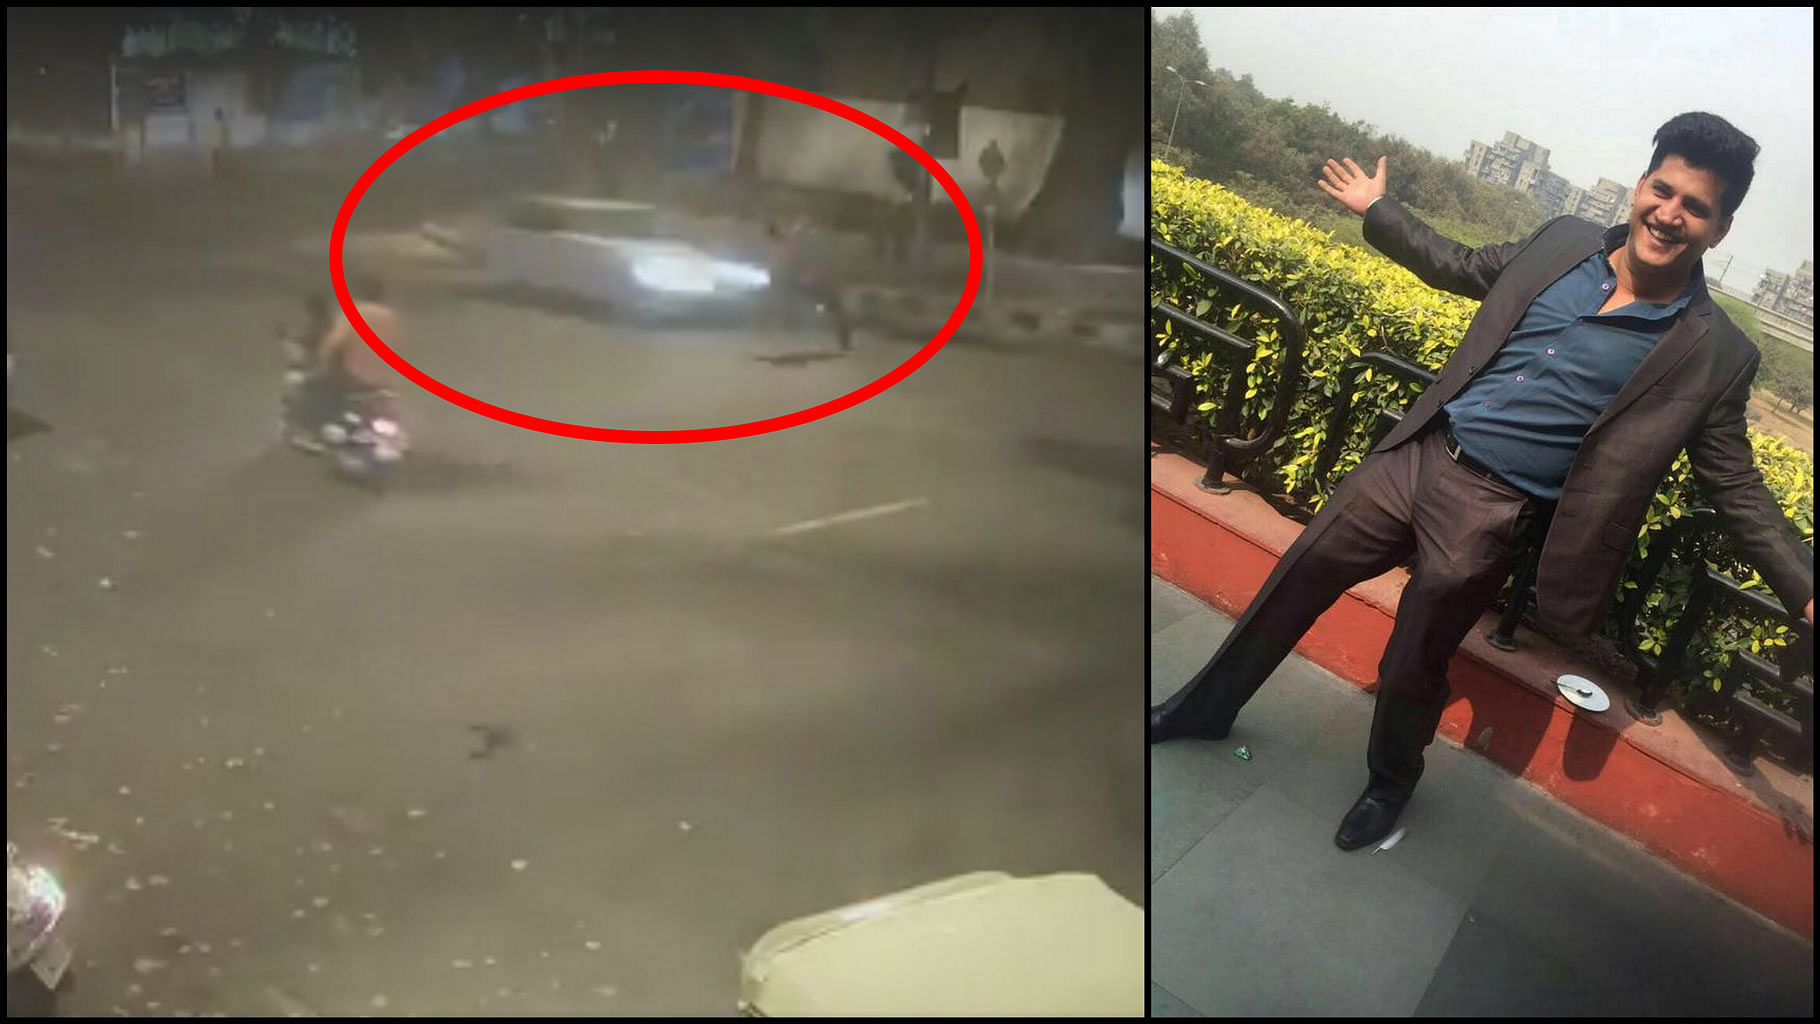 Sidharth Sharma, the 32-year-old marketing consultant who died in a hit-and-run case. (Photo Courtesy: Screengrab from CCTV footage)